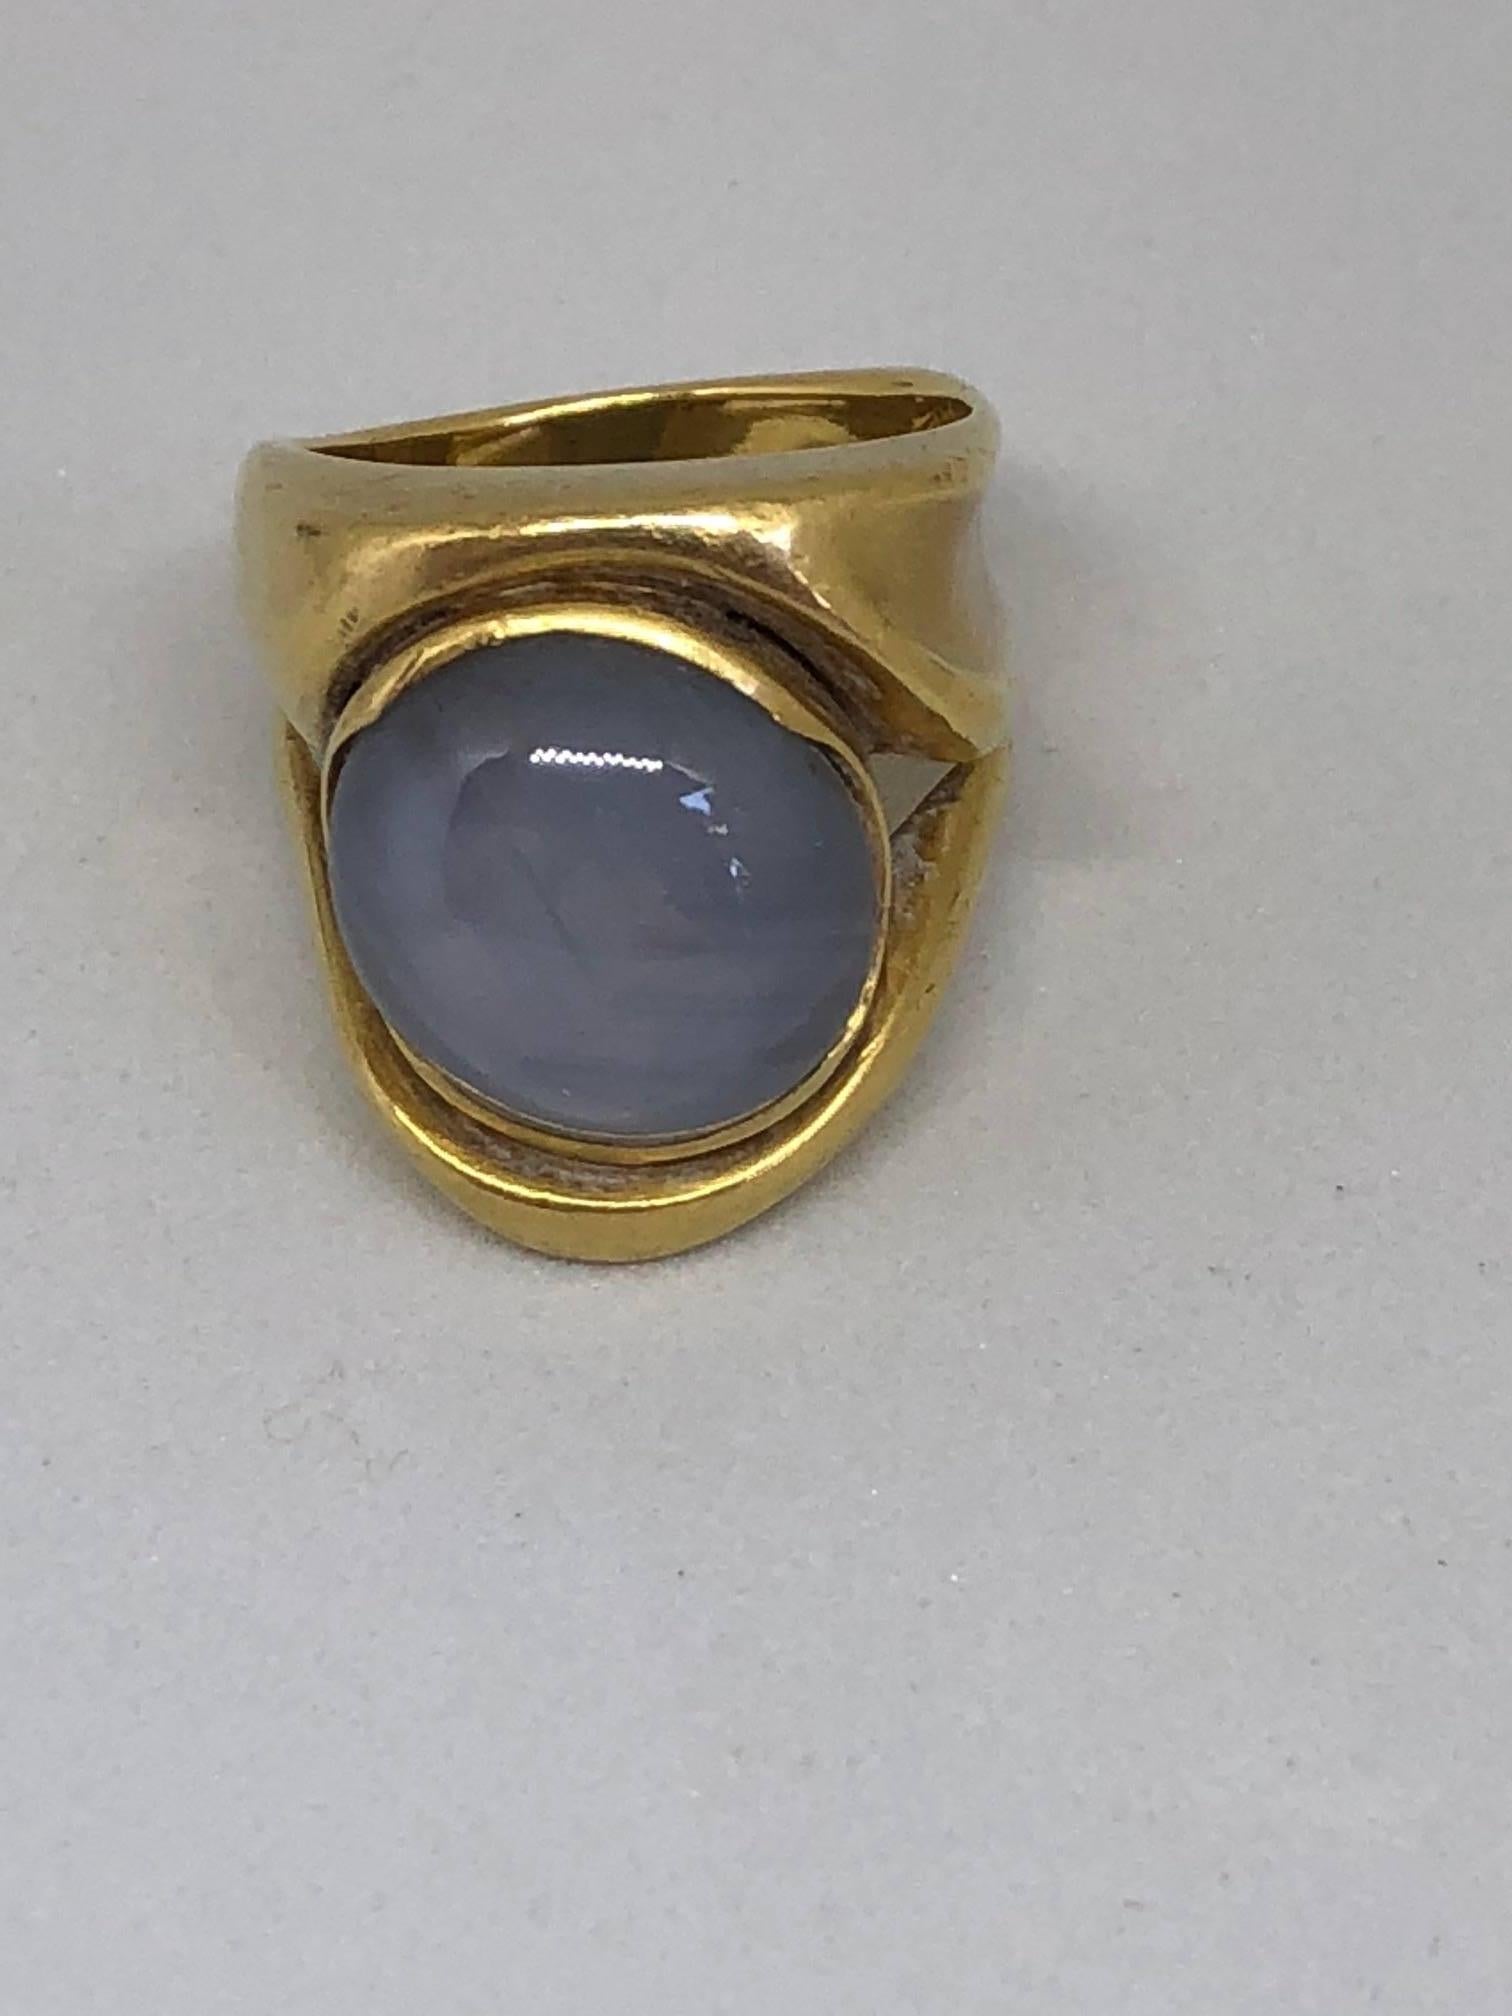 Contemporary 22.5 Carat “Star” Sapphire Gold Ring